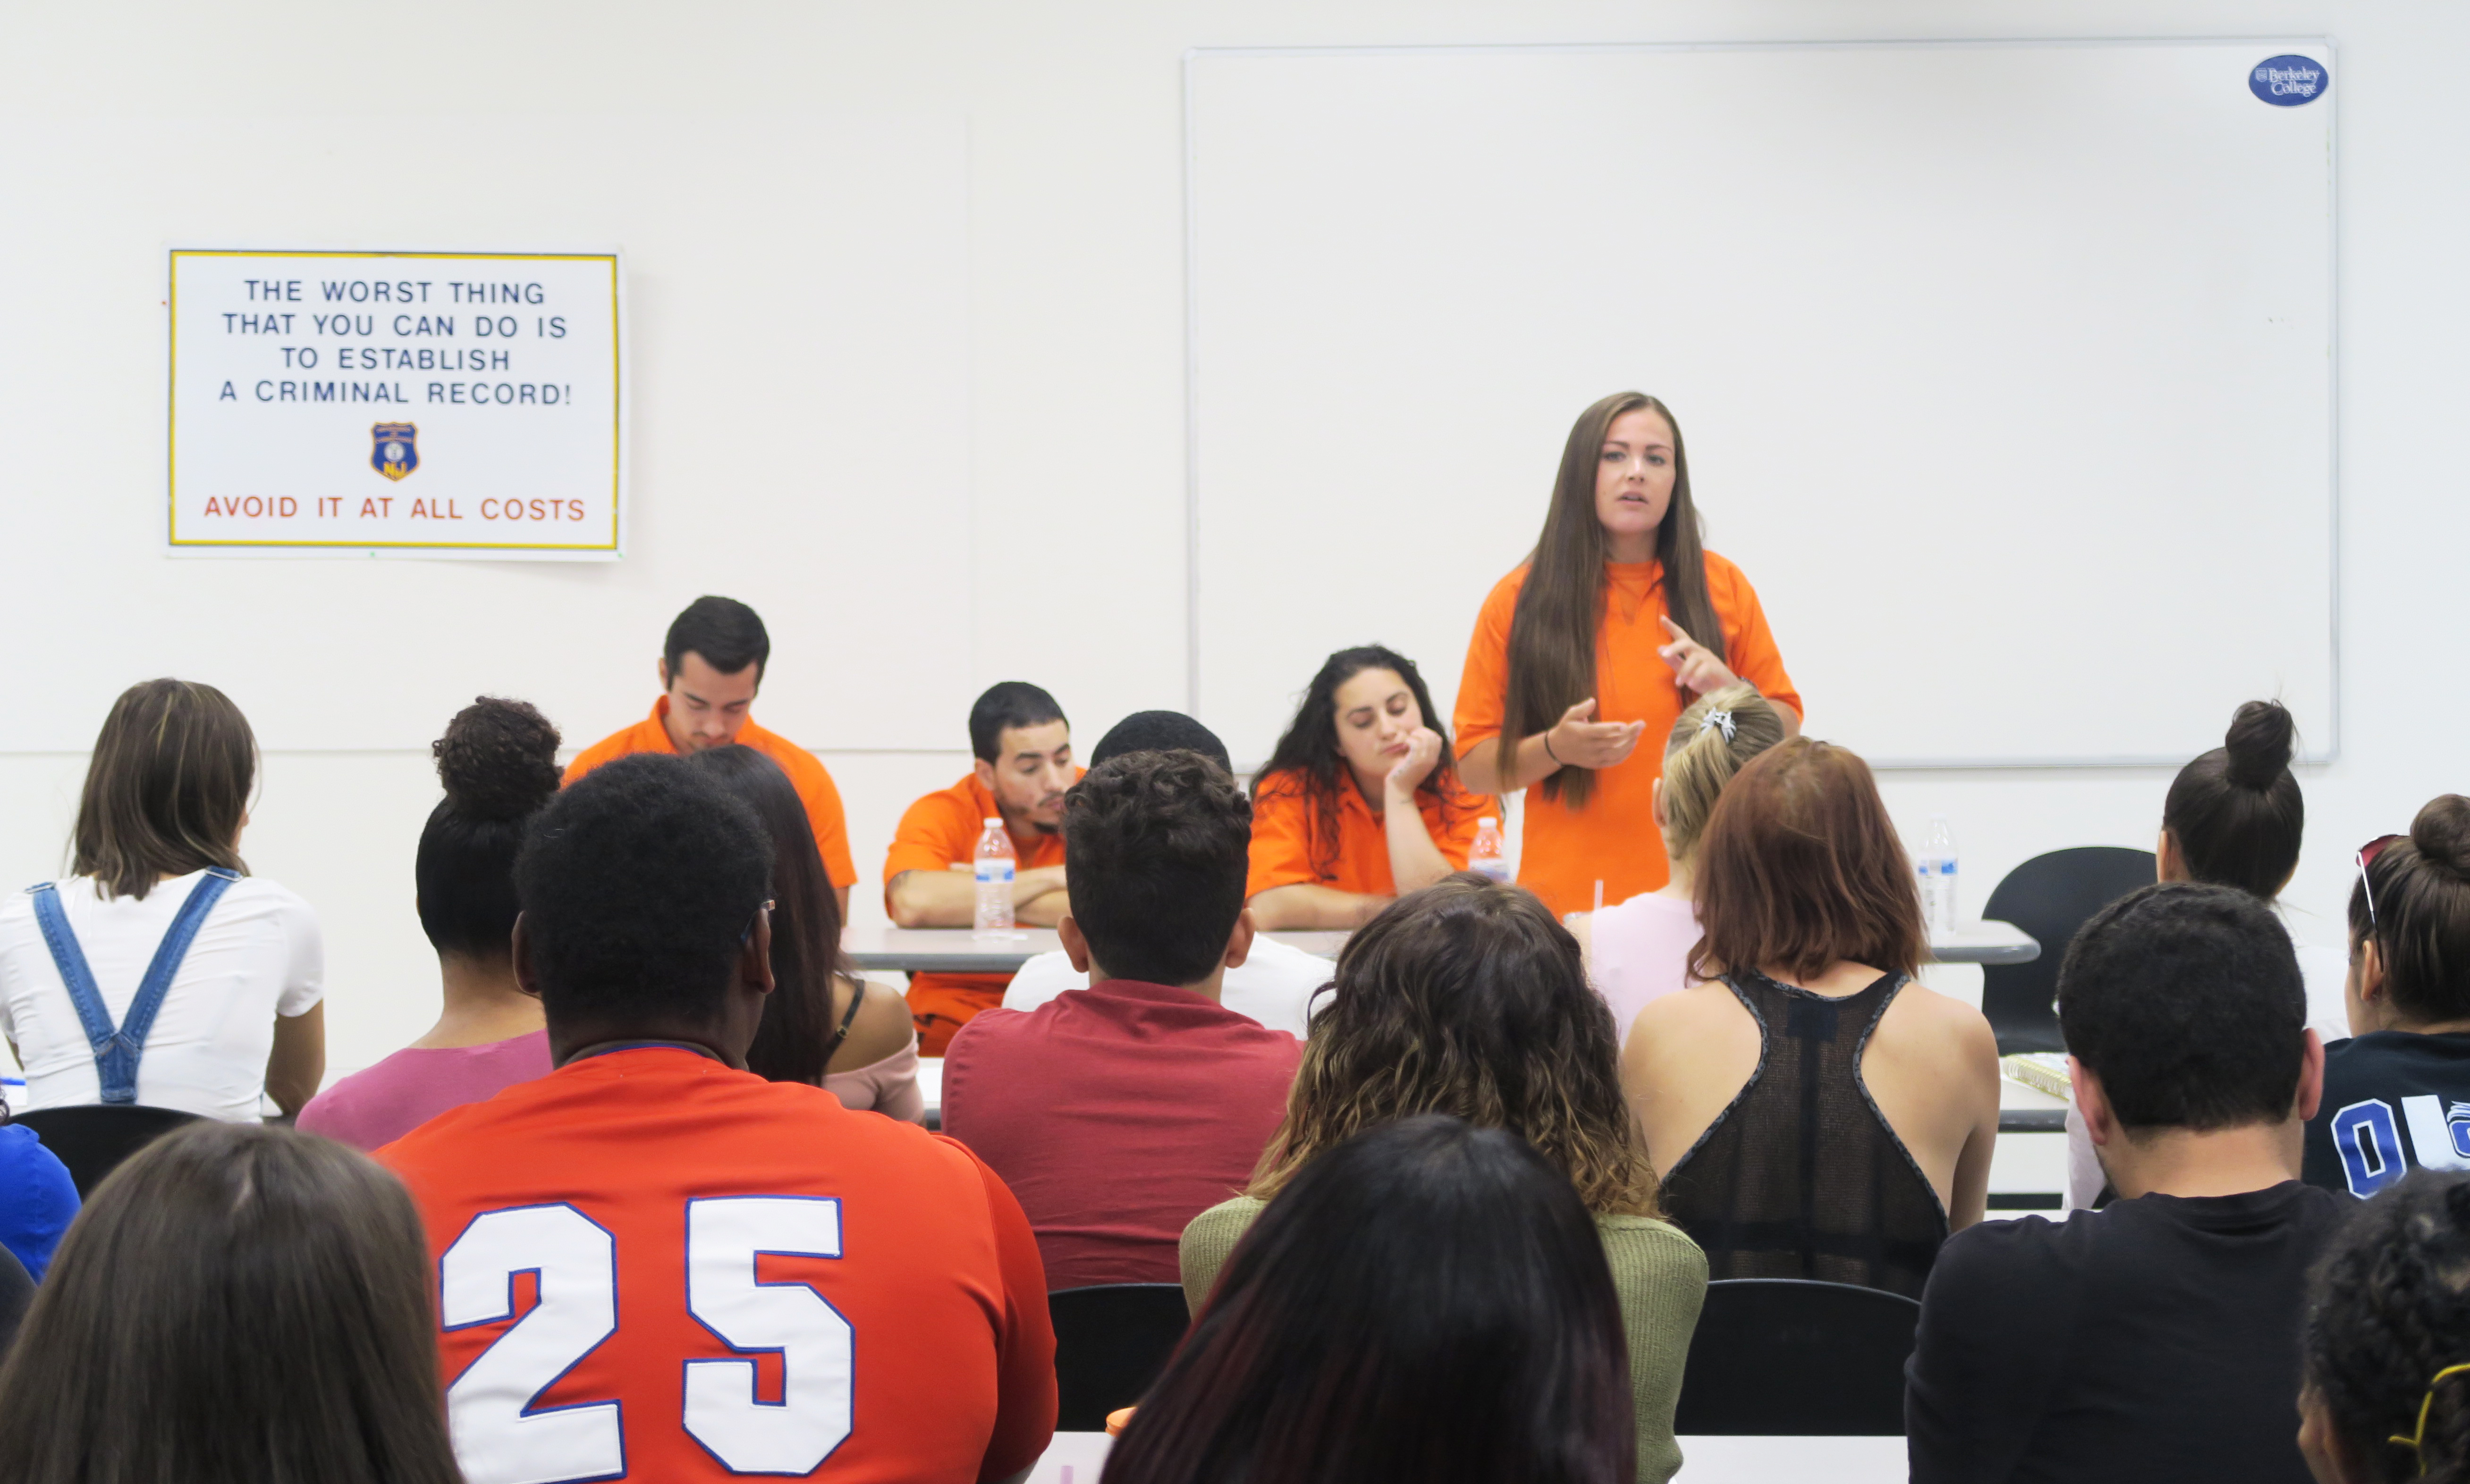 Inmate Jessica speaks with Berkeley College students as part of Project PRIDE in Paramus